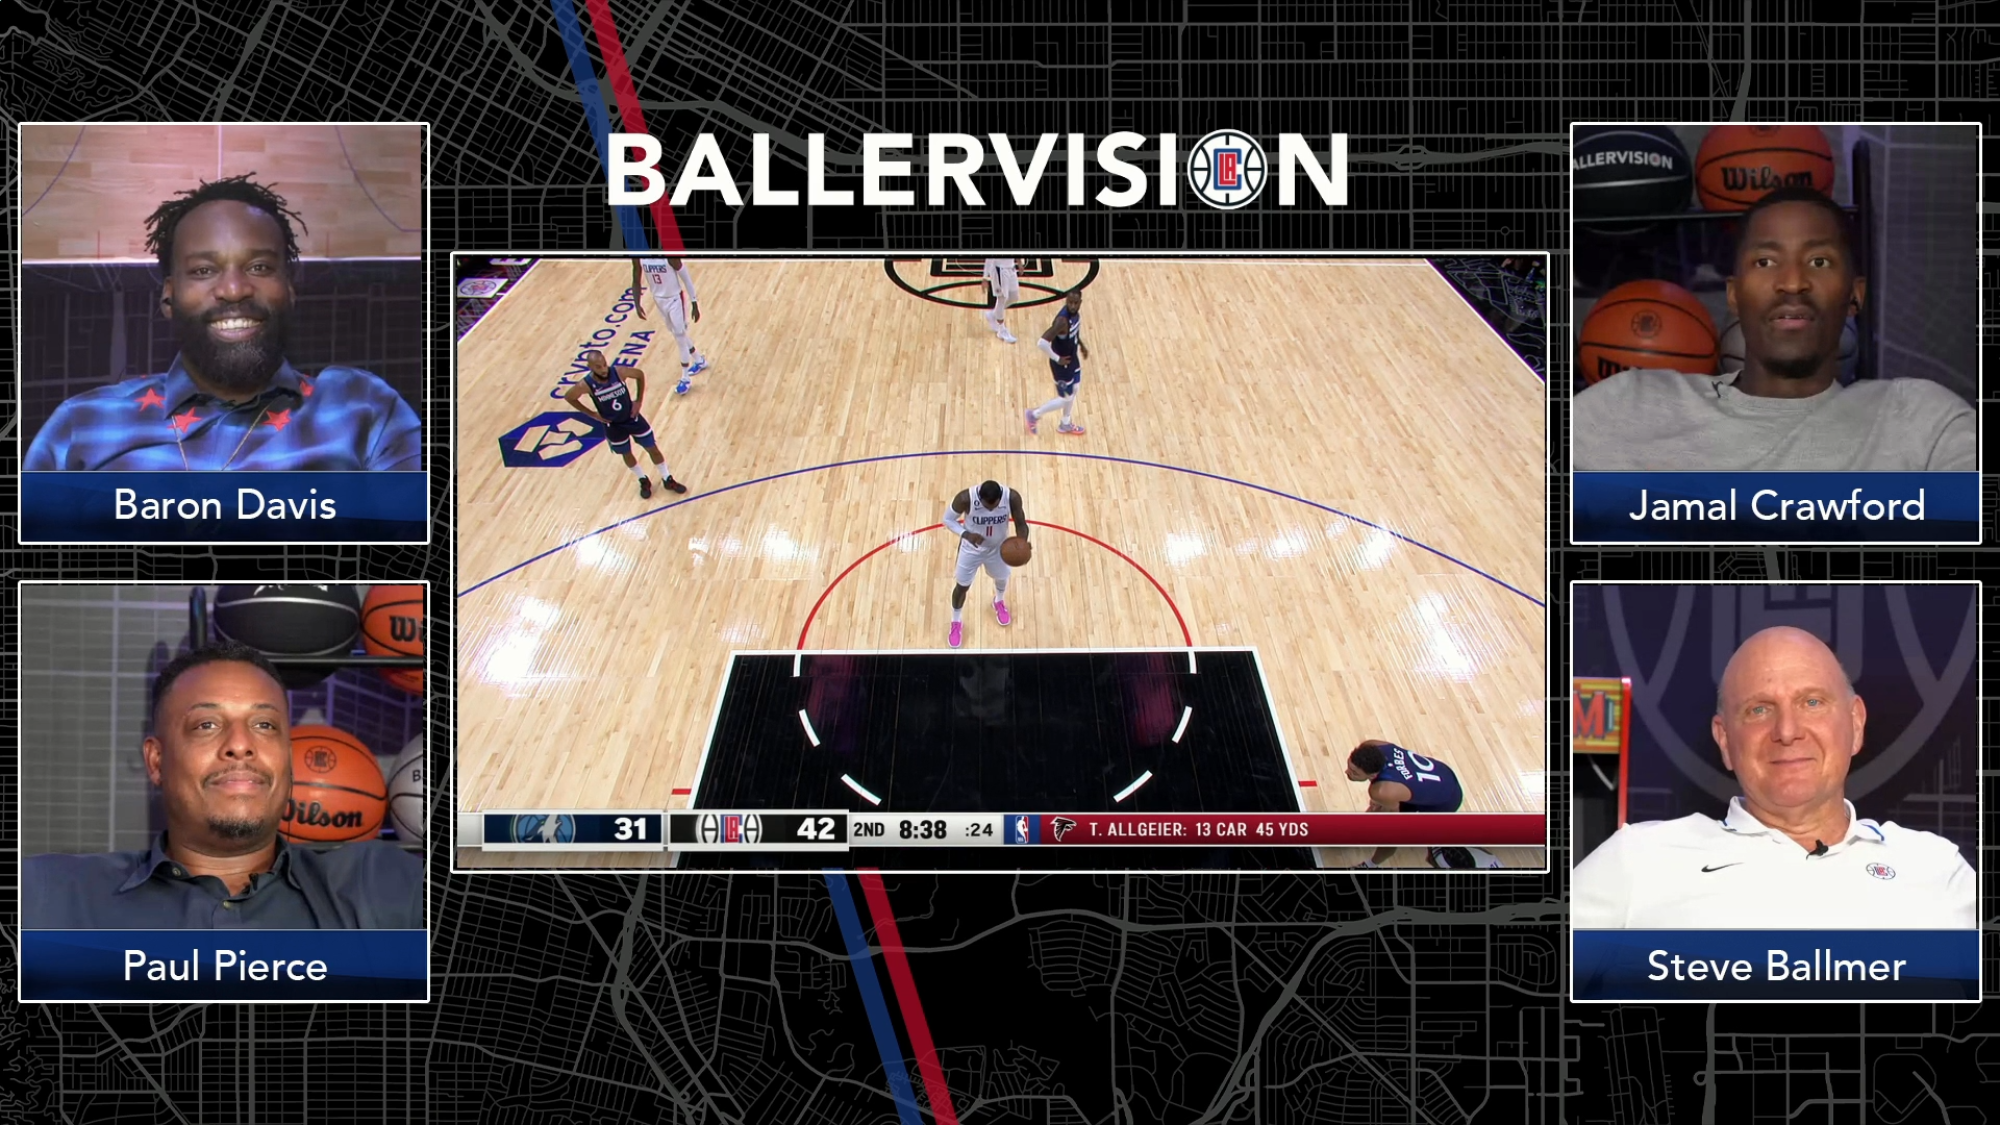 A view of how basketball fans can watch a BallerVision broadcast with panelists providing commentary on the game.